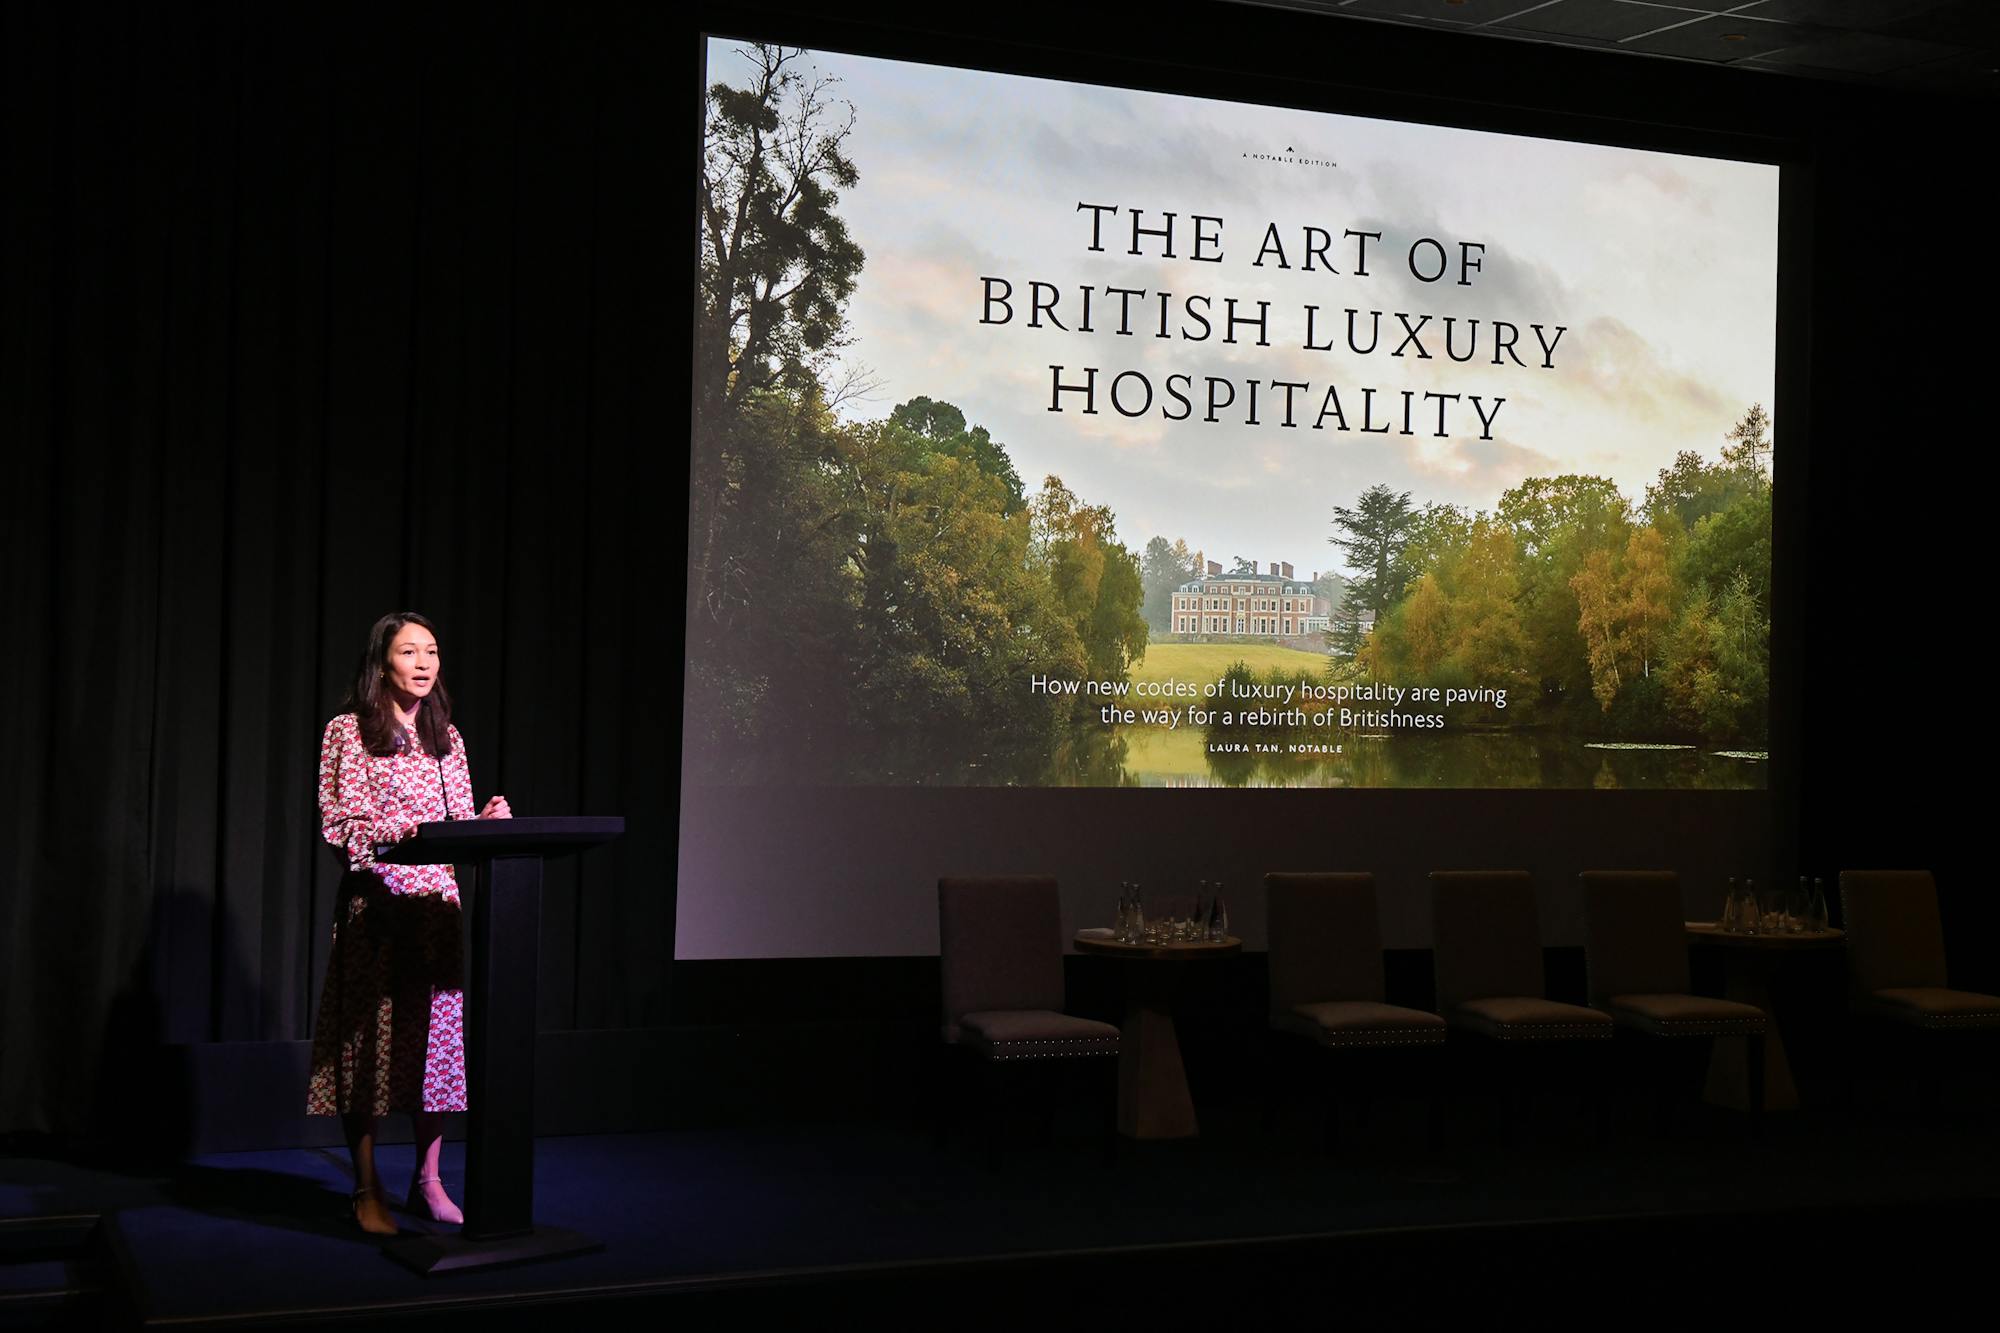 Insight The Art of British Luxury Hospitality: Reflections in light of COVID-19 